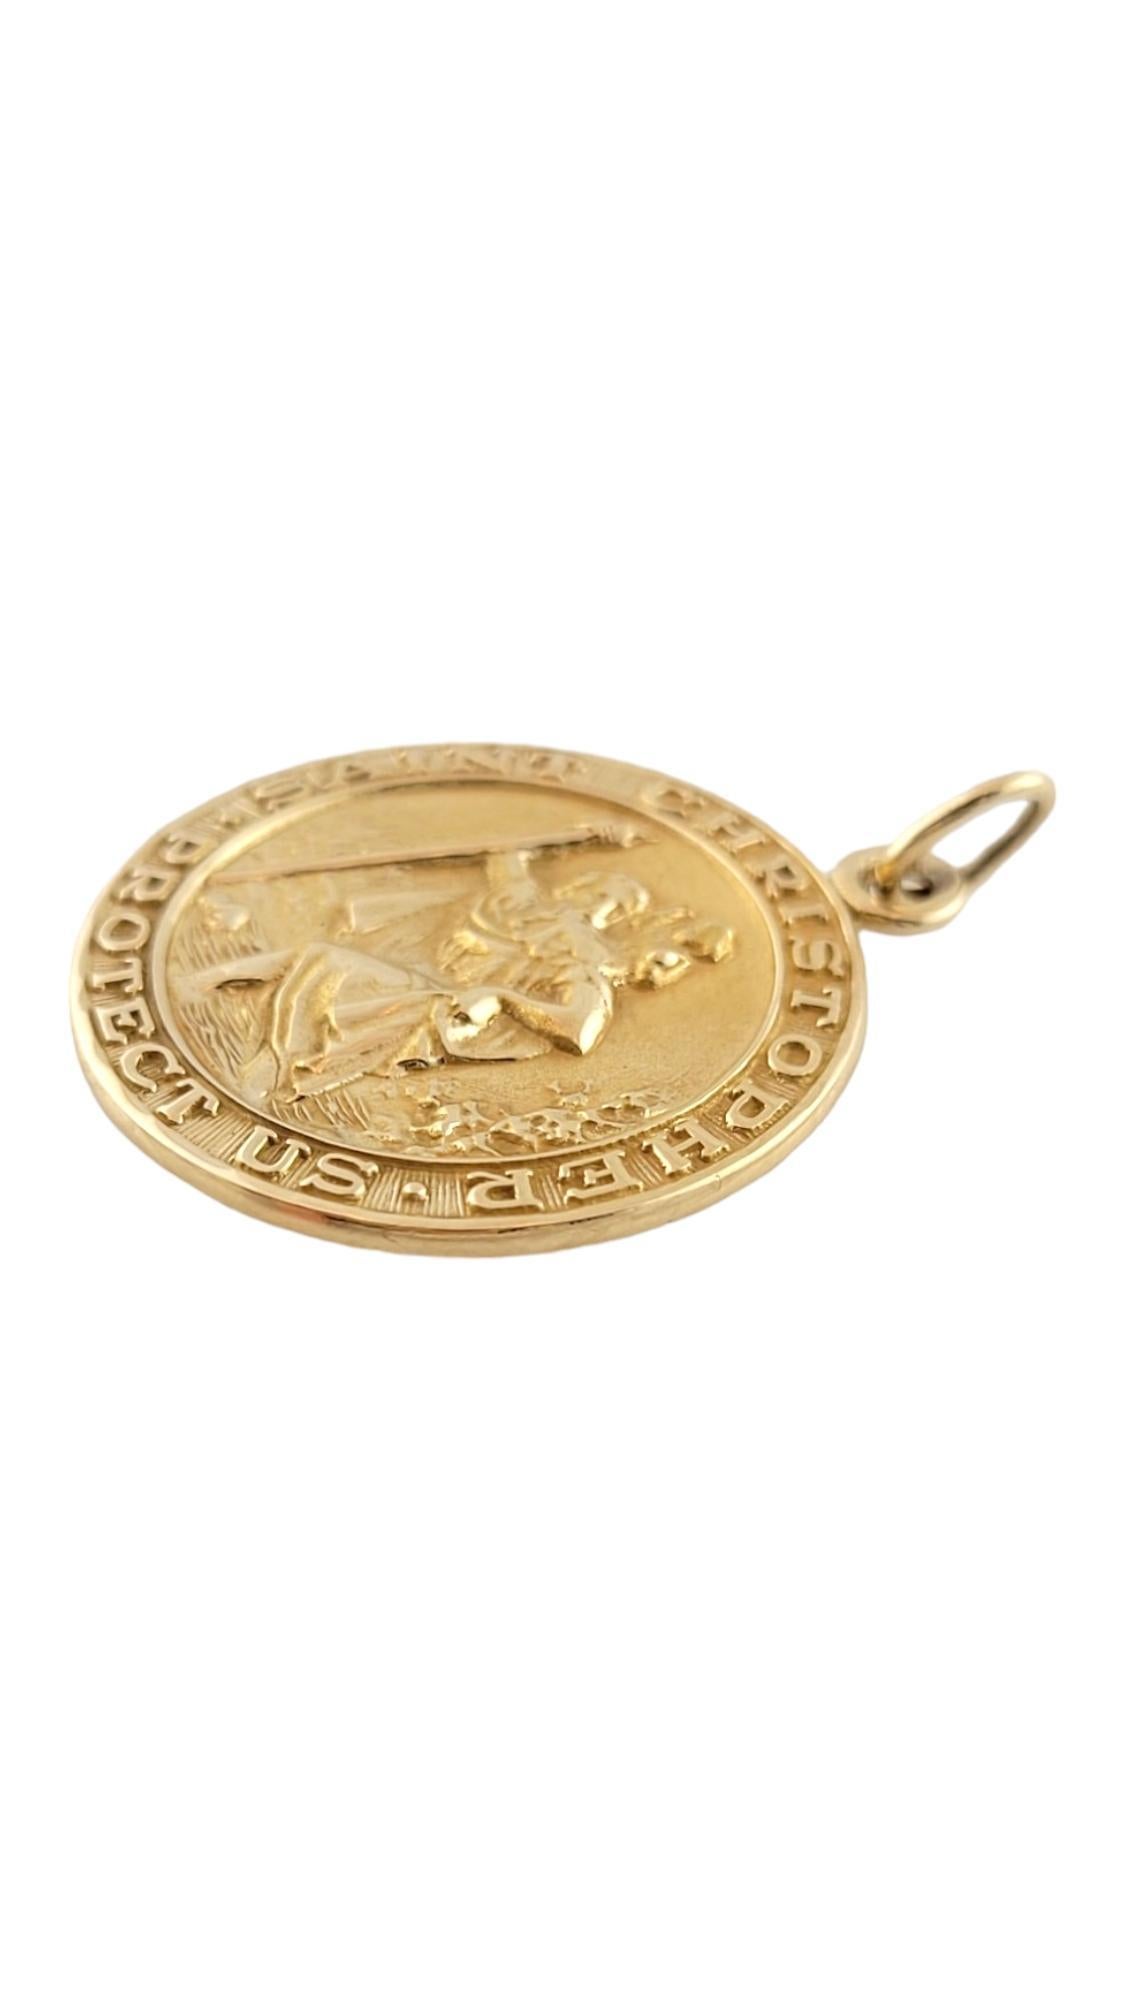 Vintage 14K Yellow Gold Saint Christopher Pendant

This gorgeous Sait Christopher pendant is crafted from 14K yellow gold with beautiful detailing!

Size: 29.3mm X 25.2mm X 1.7mm
Length w/ bail: 33.73

Weight: 4.6 dwt/ 7.2 g

Hallmark: 14K

*Chain